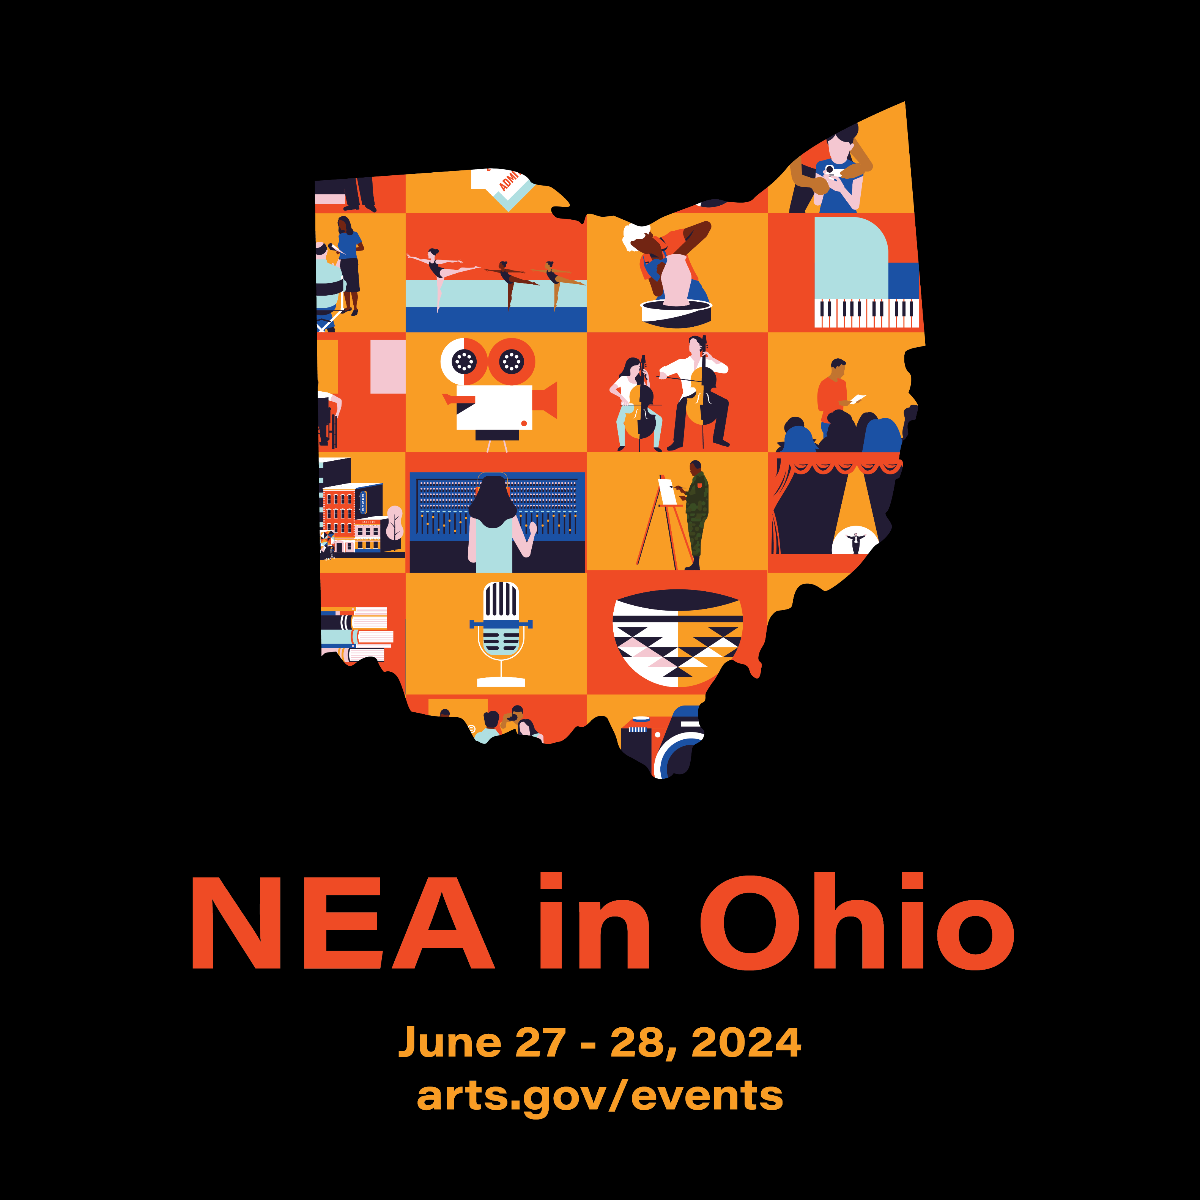 The logo for the National Endowment for the Arts.